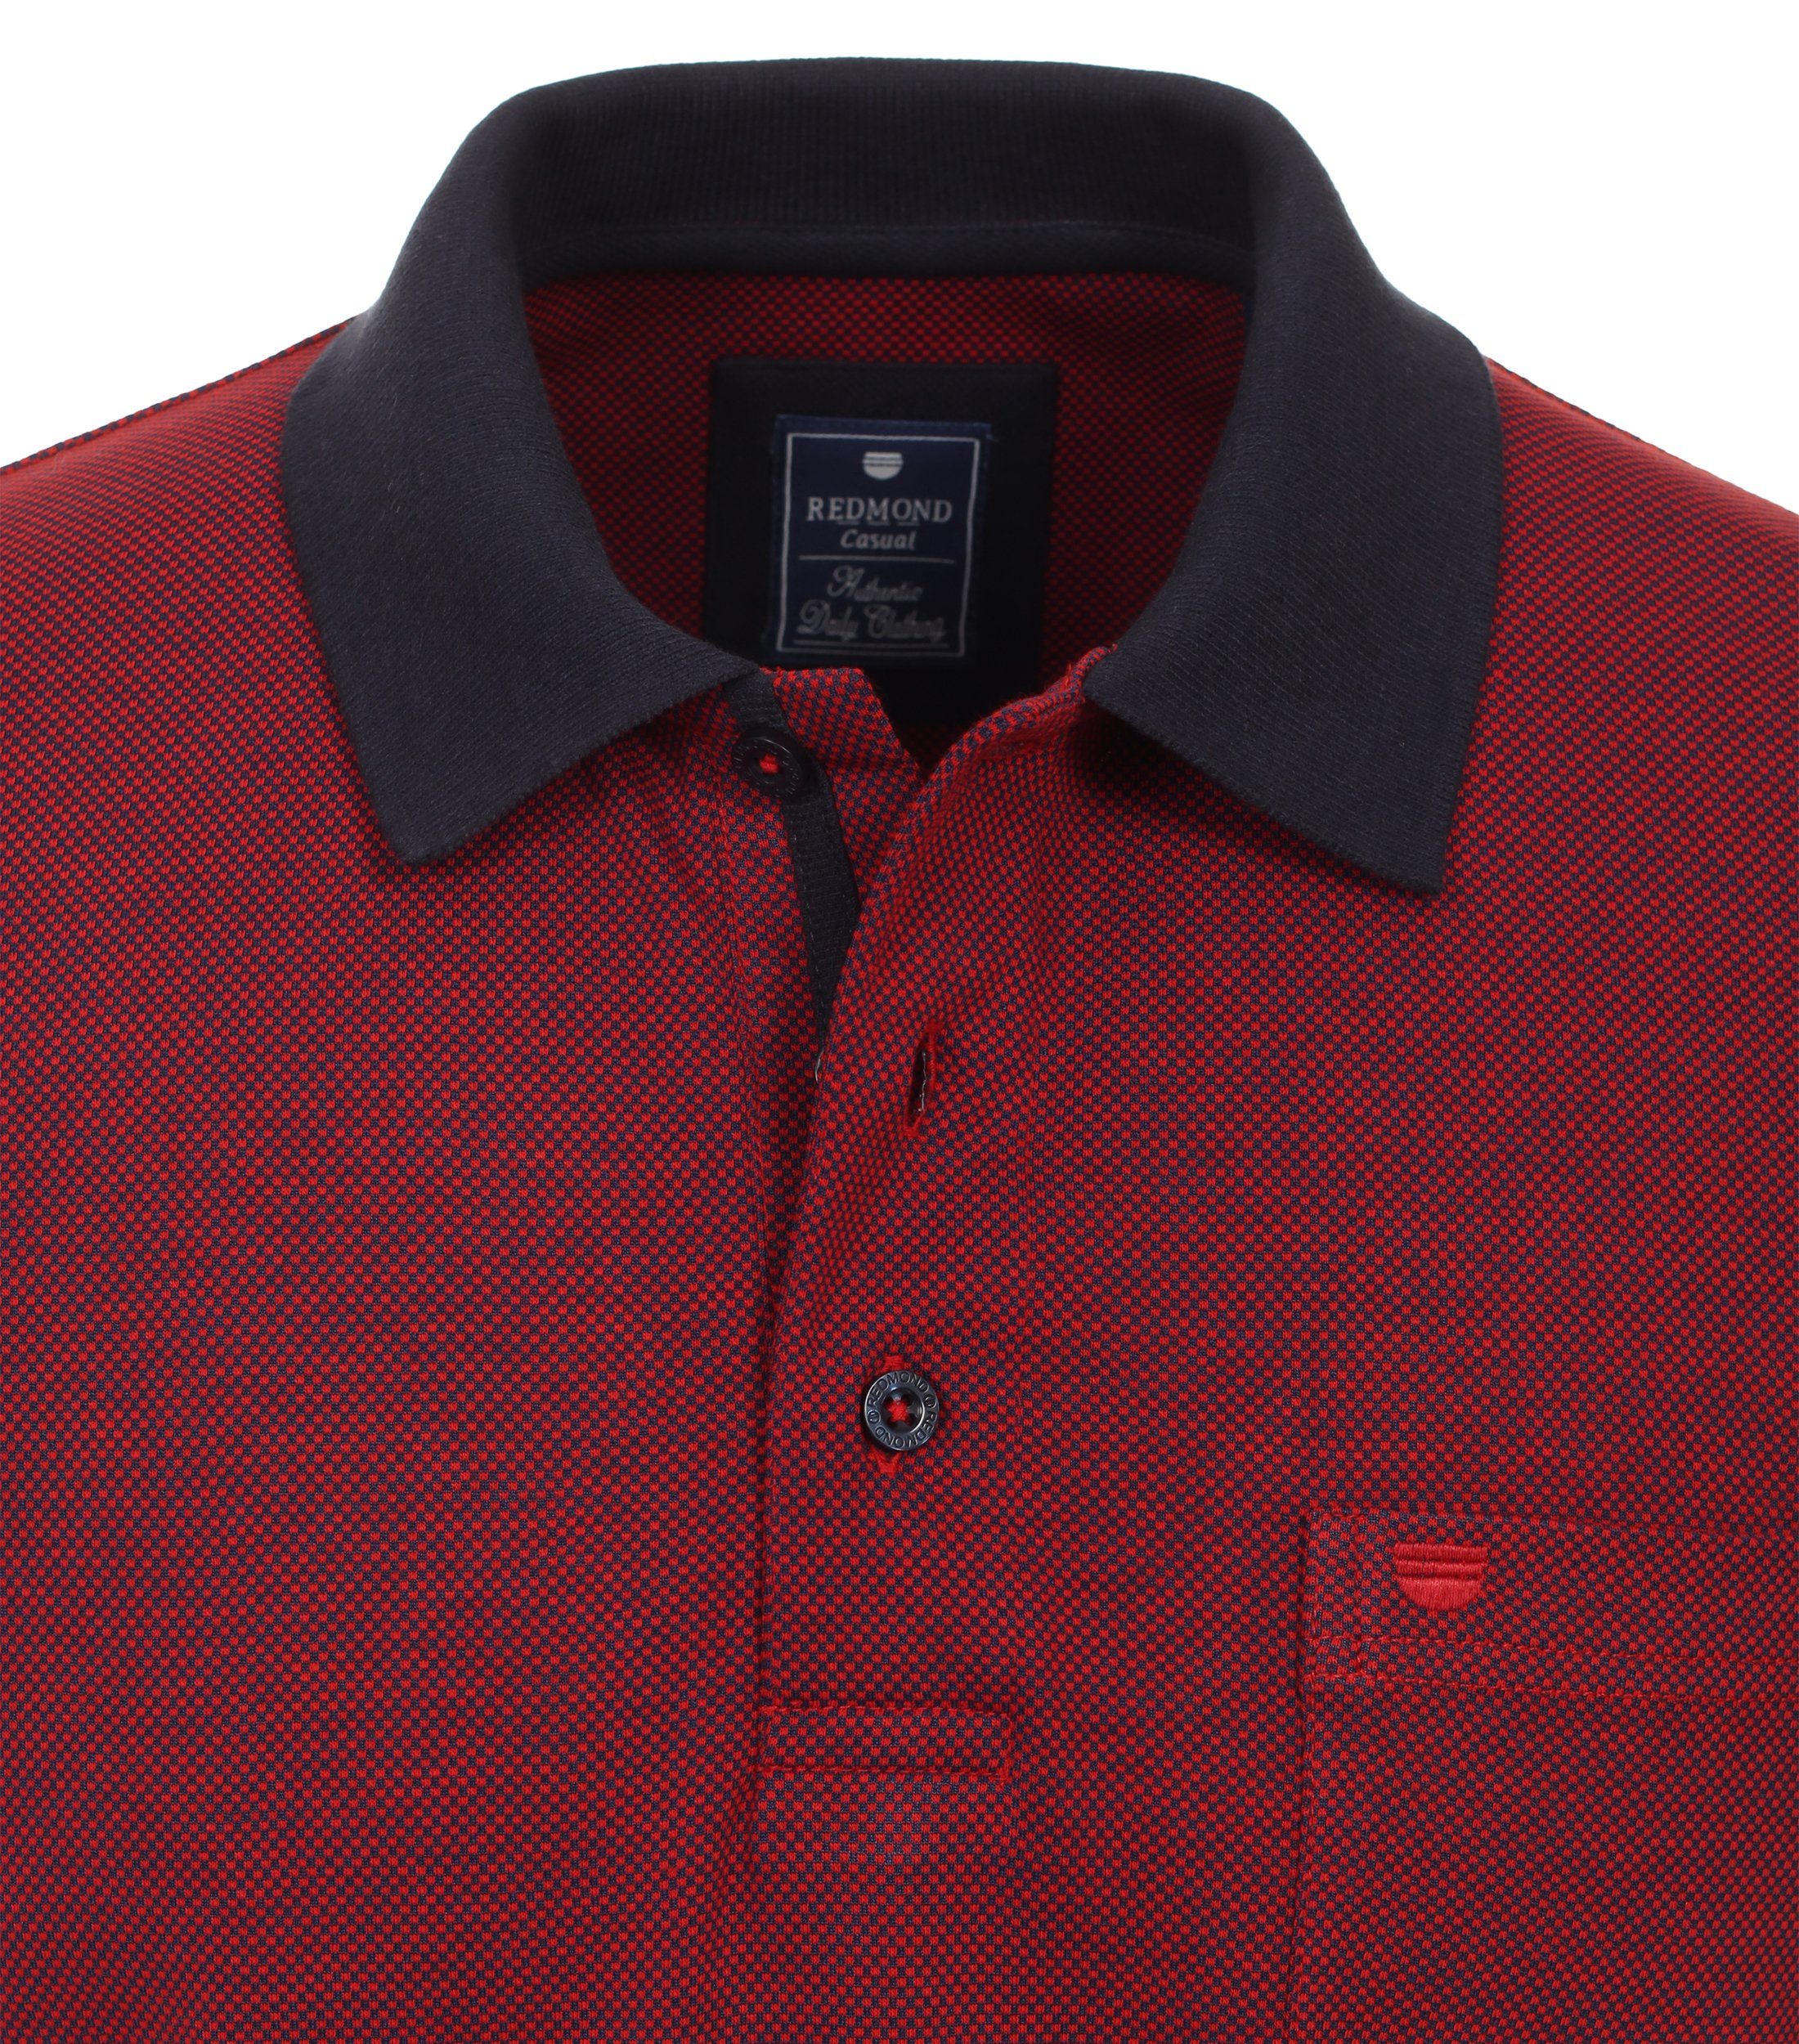 50 Poloshirt Redmond rot andere Muster